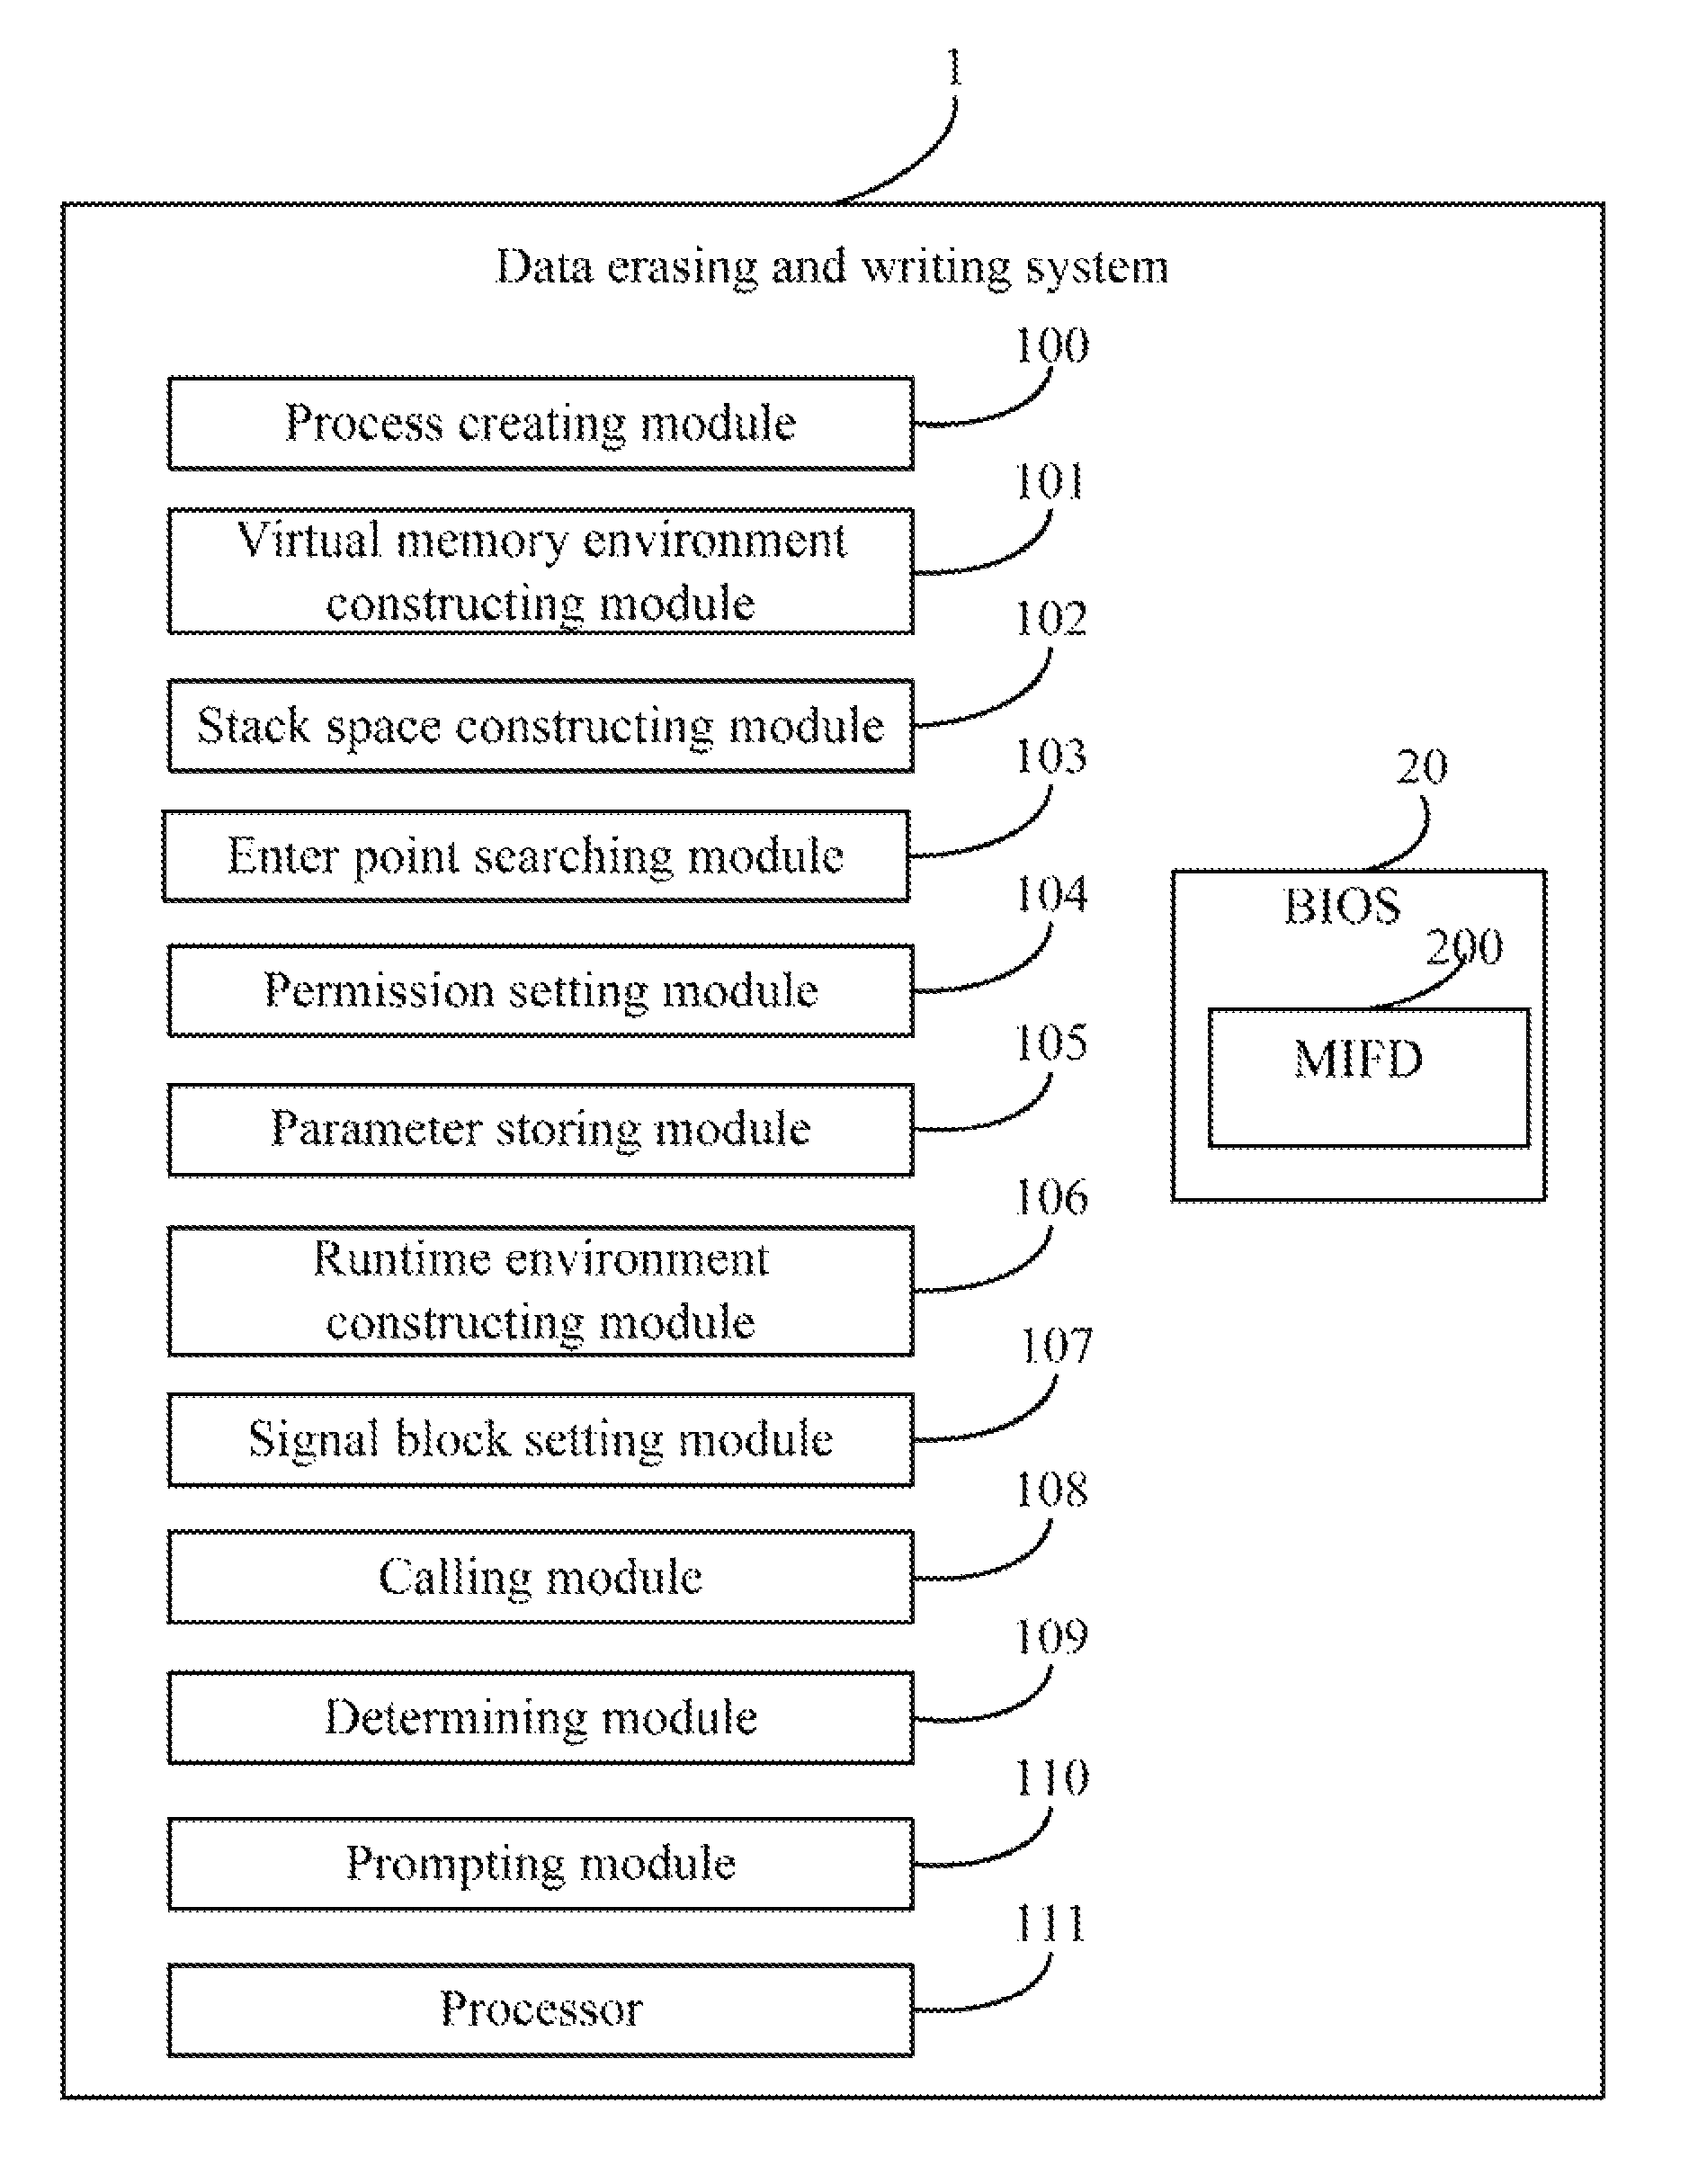 System and method for erasing and writing desktop management interface data under a linux system